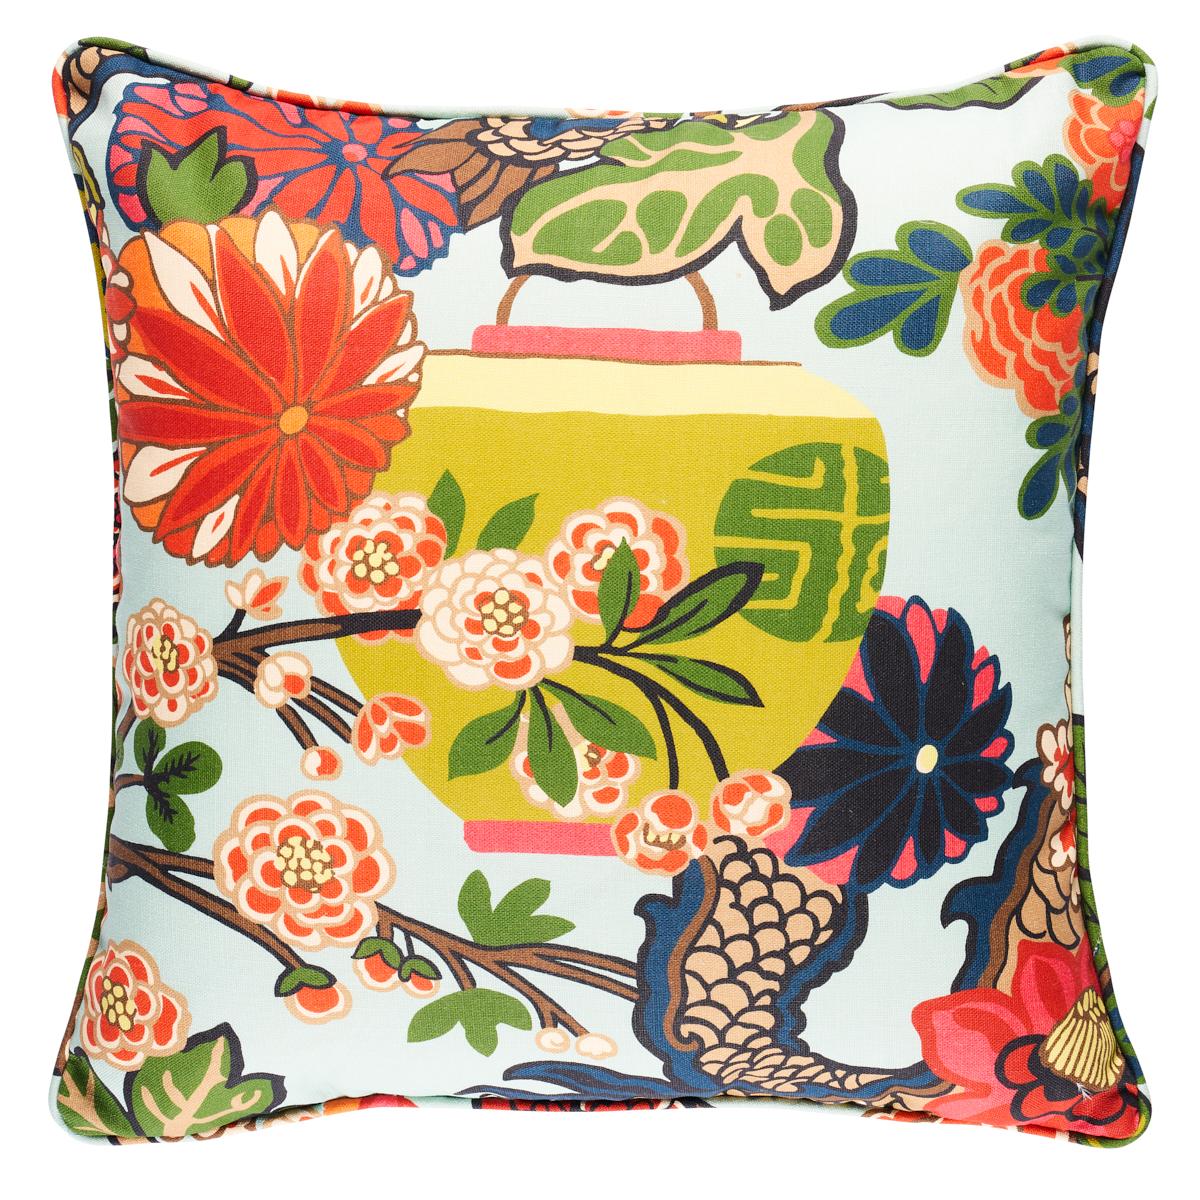 This pillow features Chiang Mai Dragon Indoor/Outdoor with a self welt finish. One of our best-loved designs, this Art Deco-inspired chinoiserie motif has been adapted into a chic outdoor fabric. Pillow includes a polyfill insert and hidden zipper